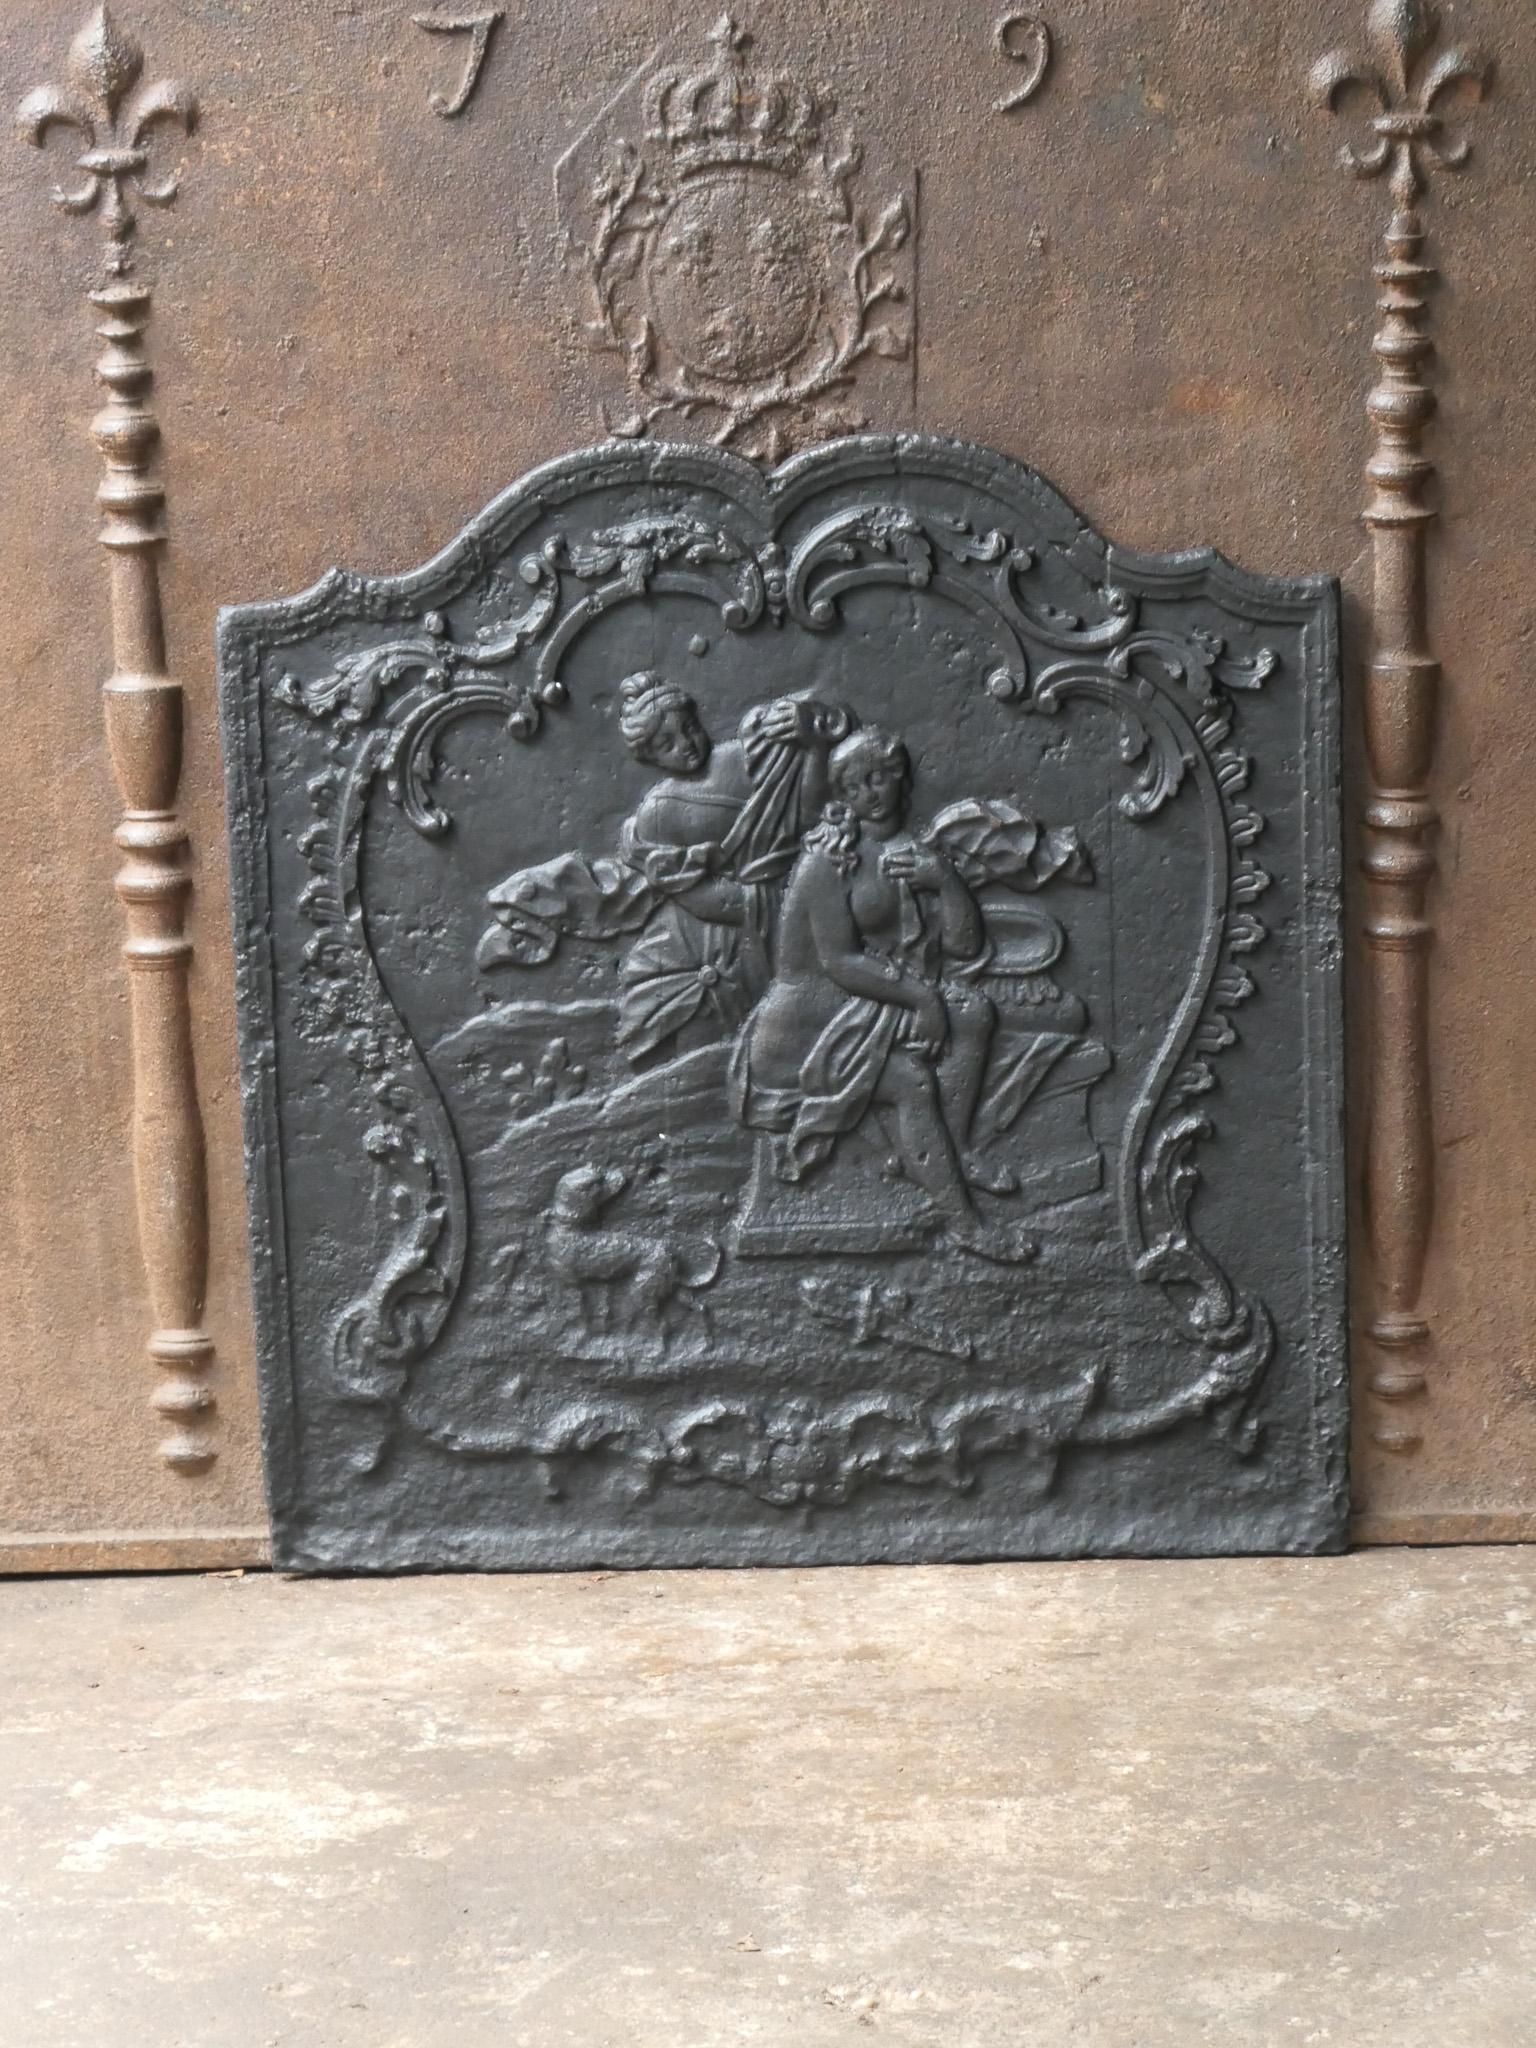 18th century French fireback with the Goddess Diana bathing.

Diana, Goddess of hunting, also protector of animals of the forest, especially the young animals. She experienced great pleasure in hunting, but took care that she did not kill more